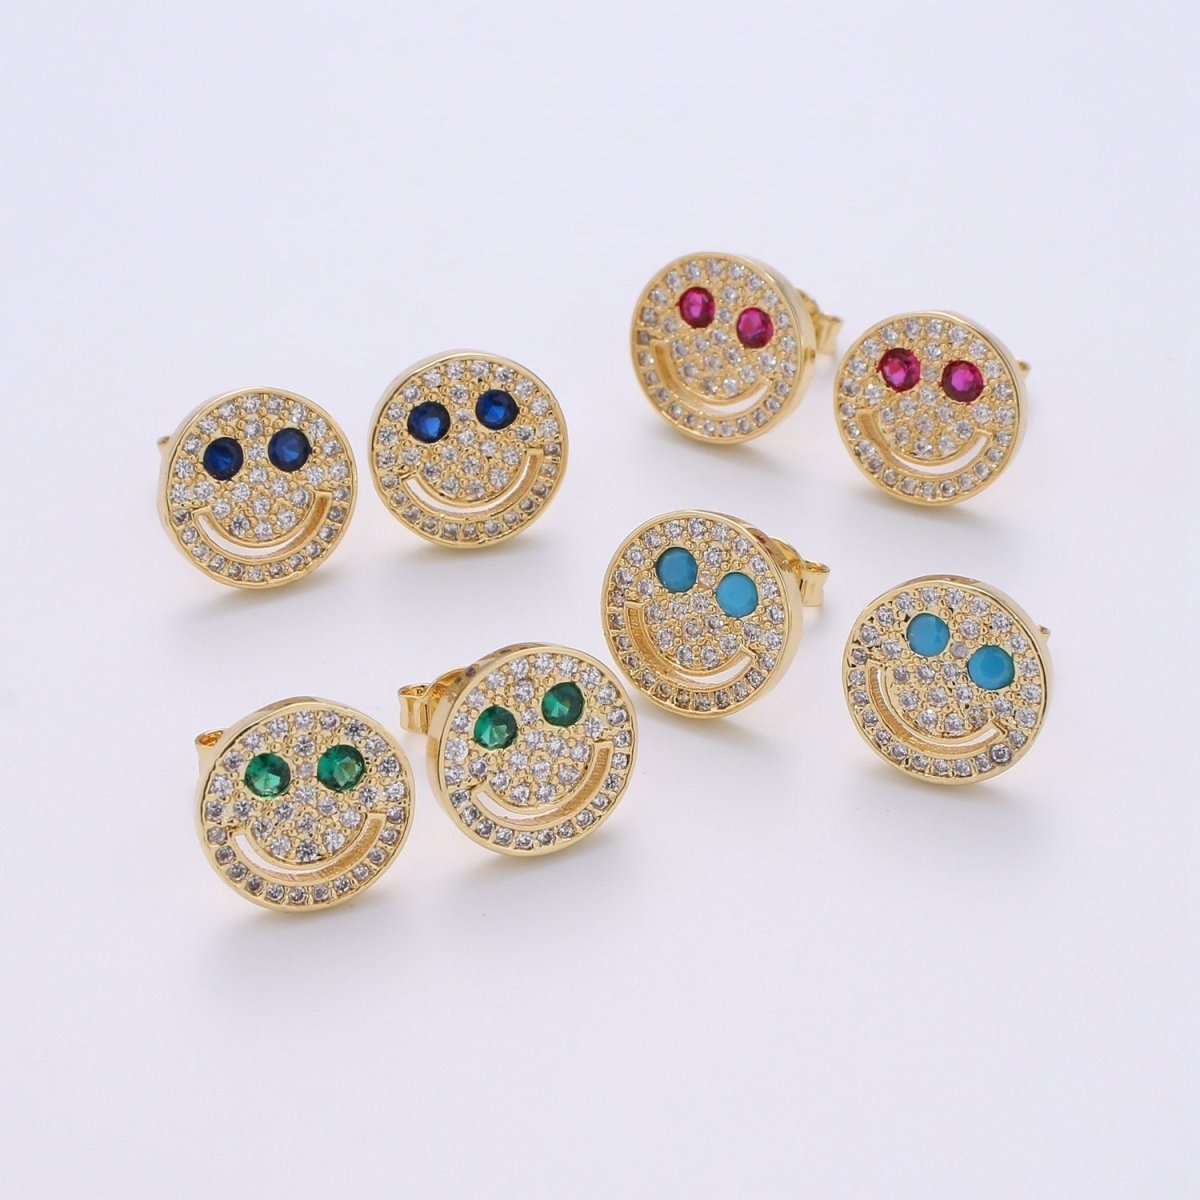 Cz Smiley face stud earrings, Tiny smiley face studs, simple gold stud earrings, Round Gold Studs, happy face studs, disc stud earrings Q-301 - Q-304 - DLUXCA